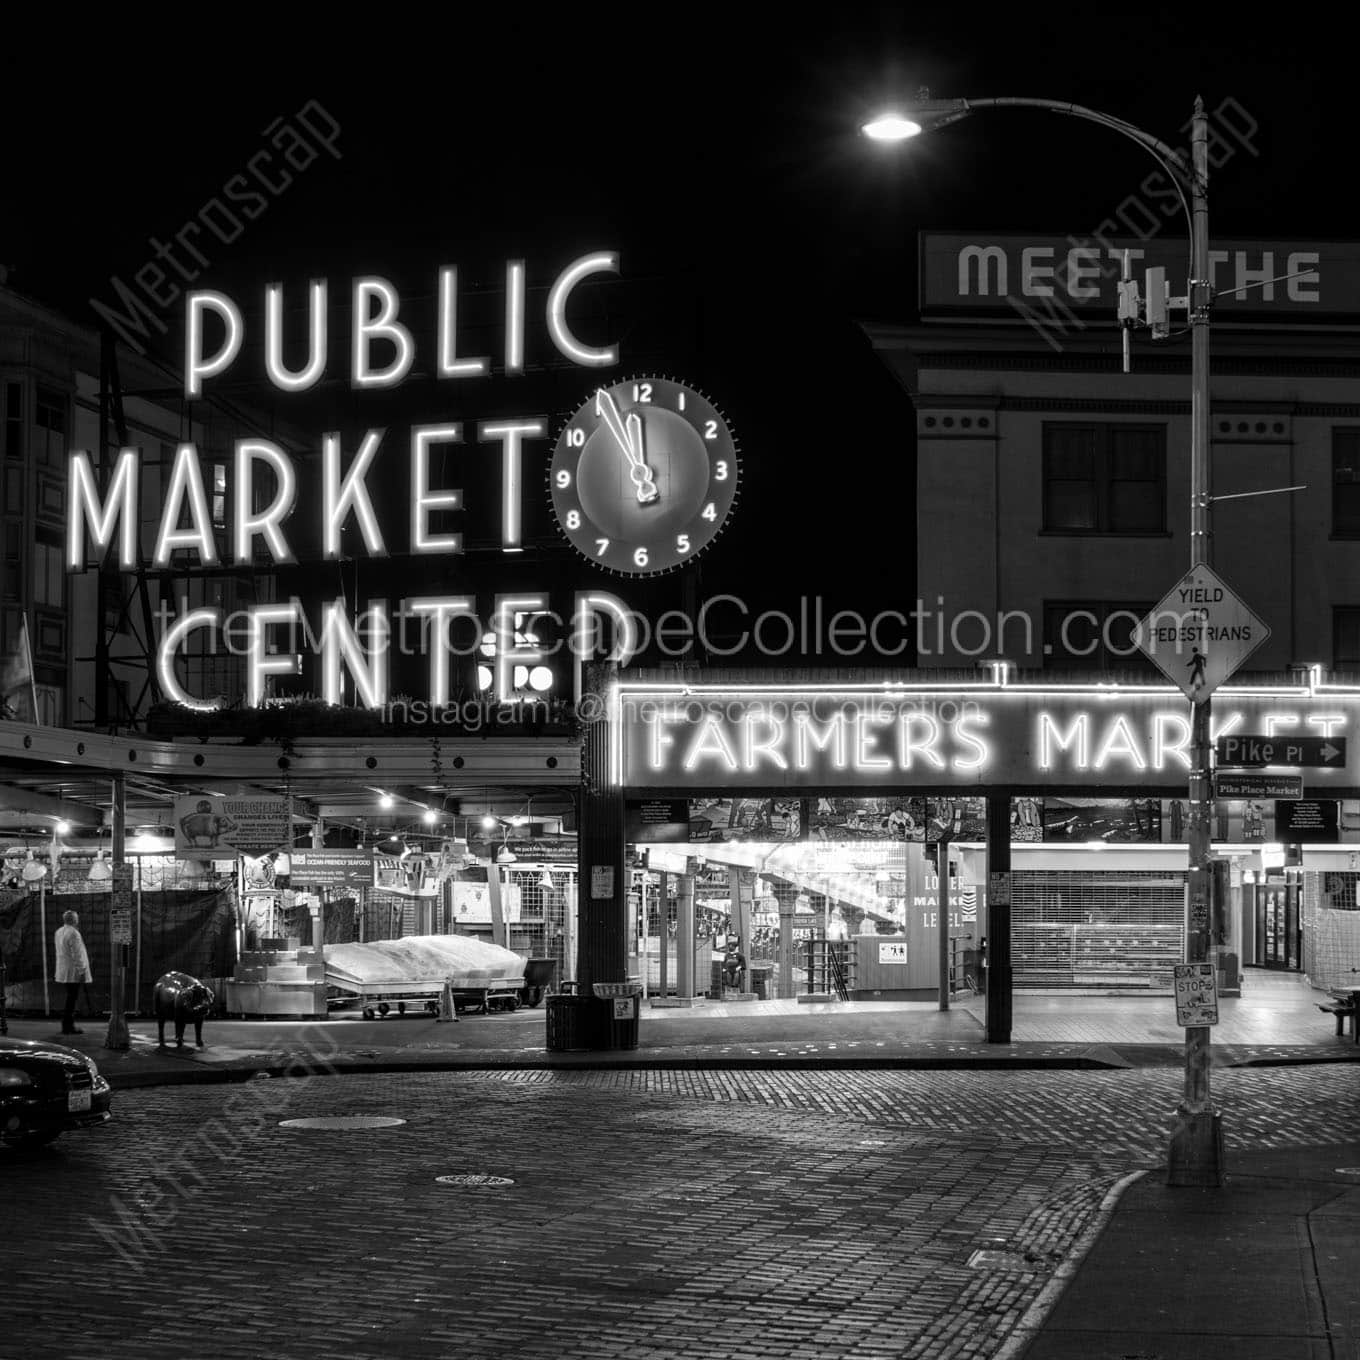 pike place public market at night Black & White Office Art